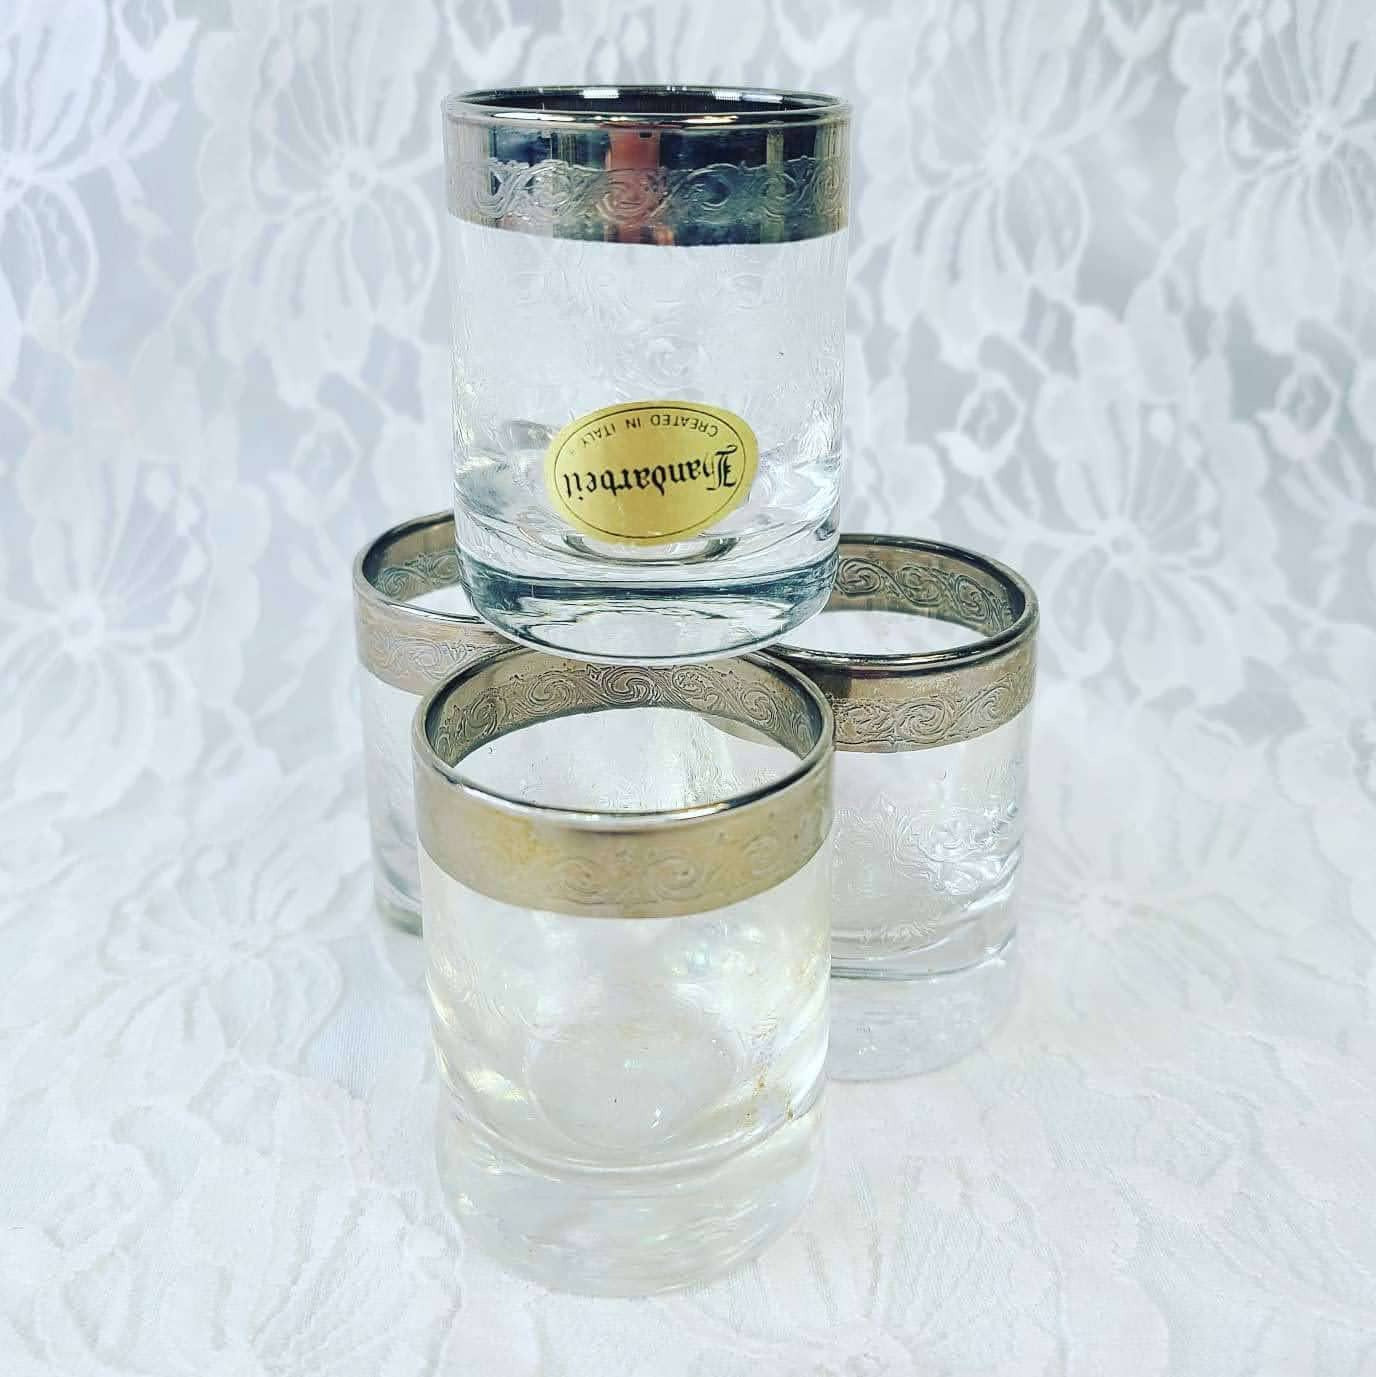 Shot Glasses Set of 4 ~ Mid Century Vintage 1950's ITALY Handerbeit - Silver Rimmed Hand-Etched~ Retro Drinking Glasses - Antique Barware